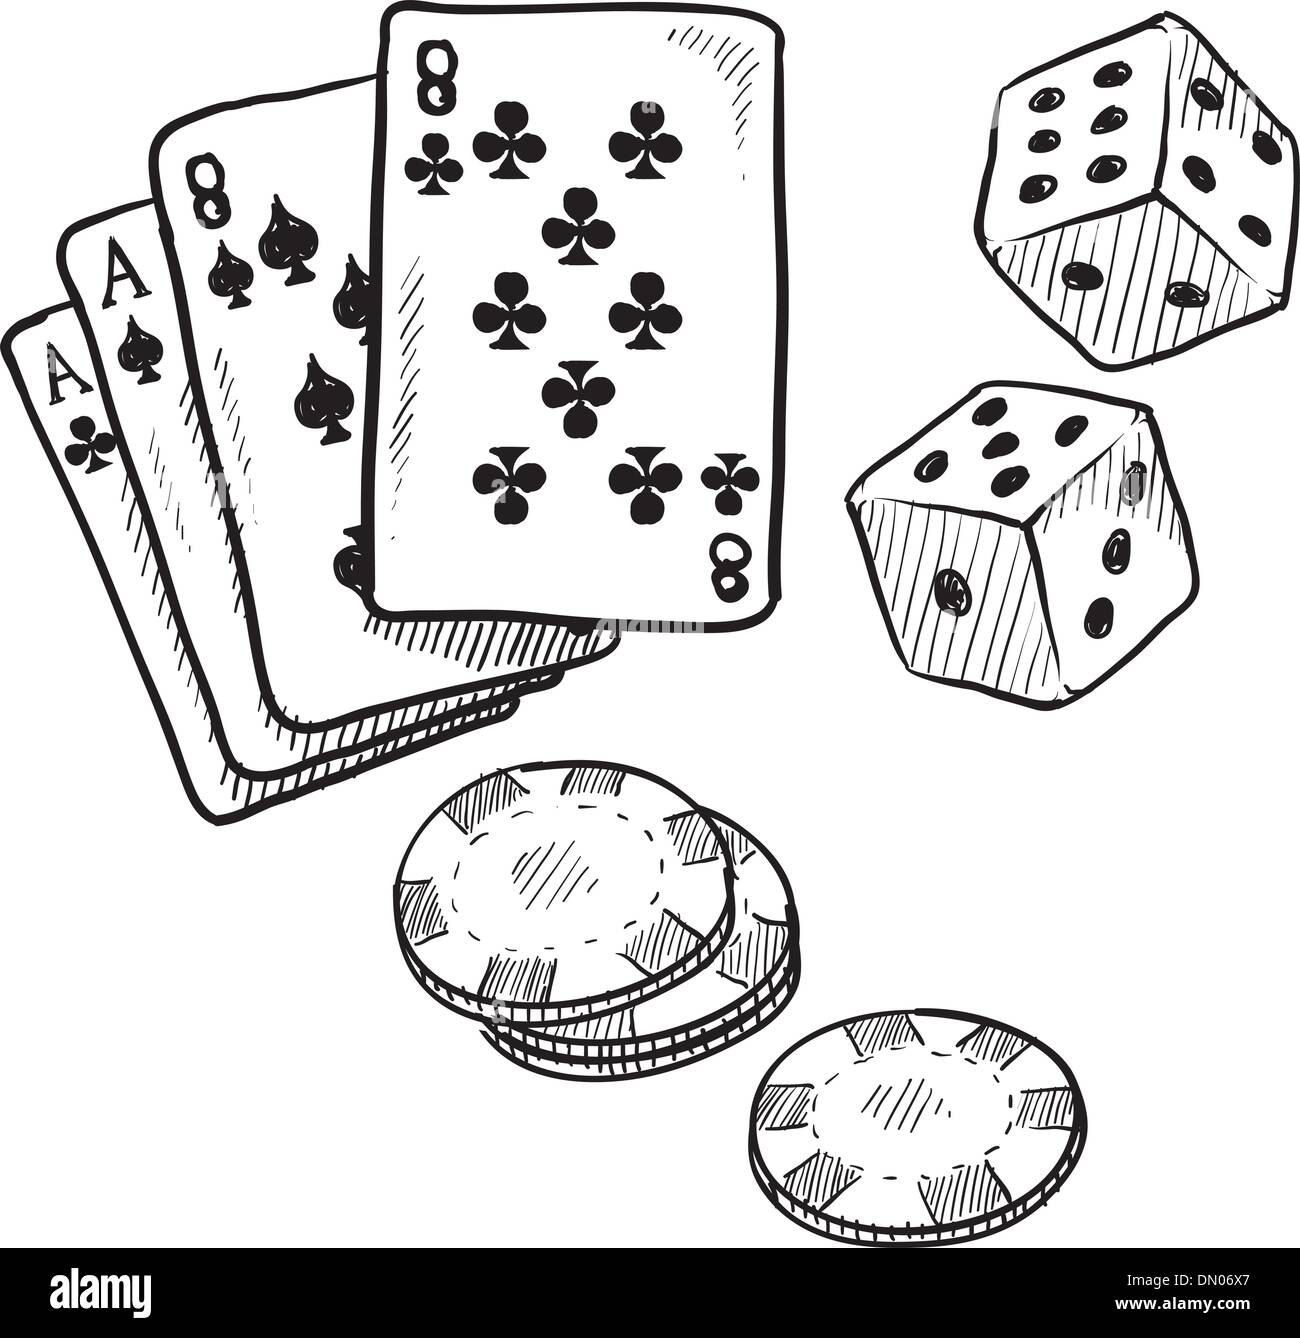 Gambling objects sketch Stock Vector